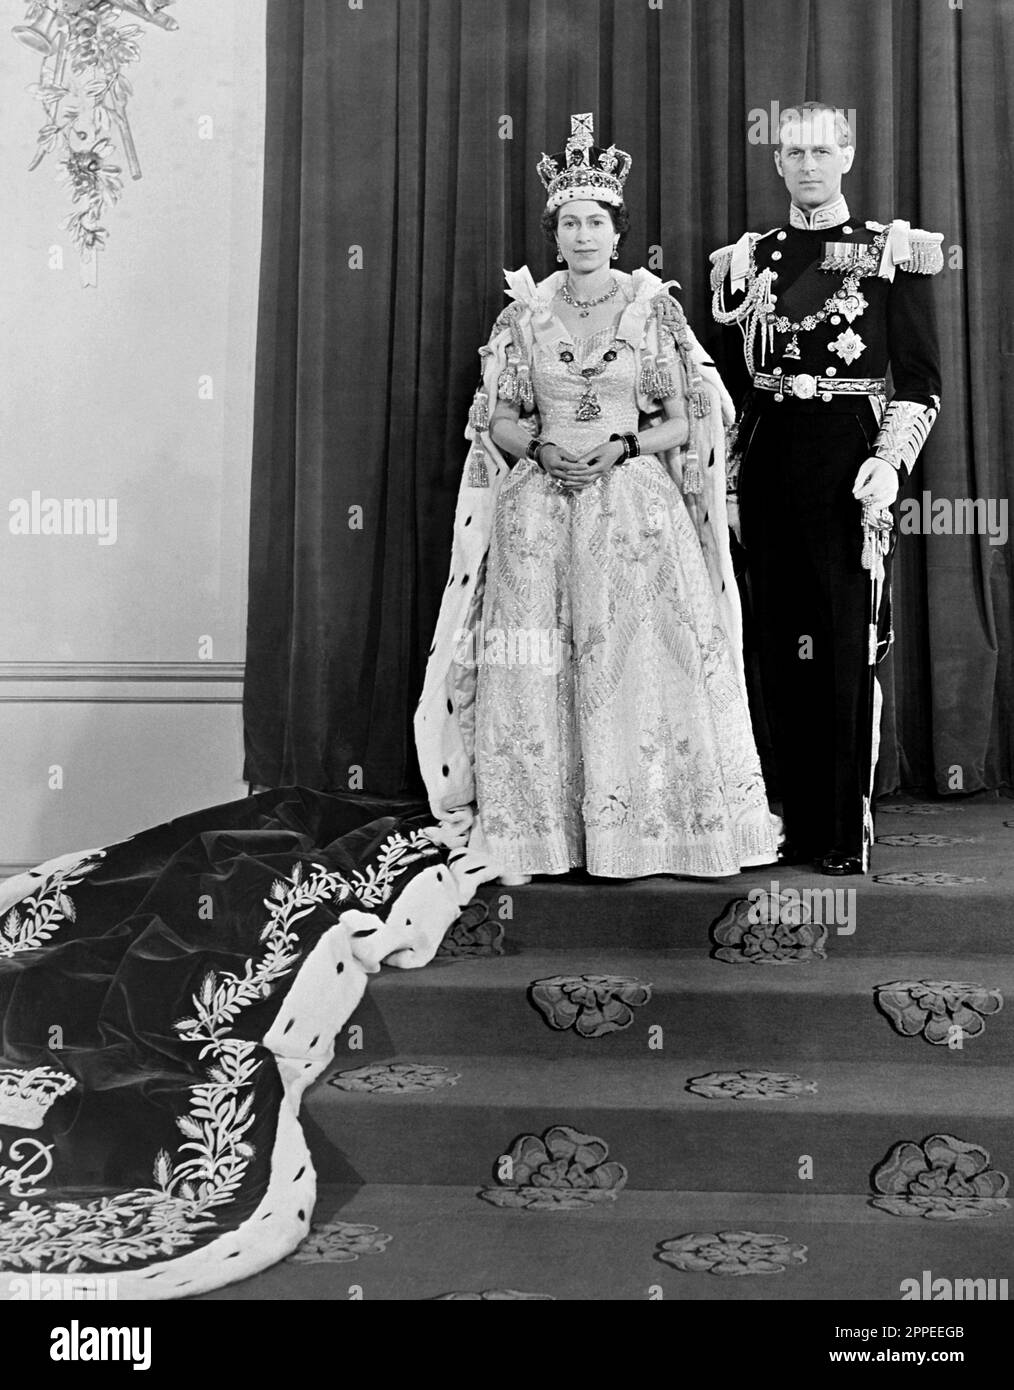 File photo dated 02/06/53 of Queen Elizabeth II and her husband the Duke of Edinburgh at Buckingham Palace after her coronation in Westminster Abbey. King Charles III's coronation will take place on May 6, in a ceremony steeped in 1,000 years of history. The King will be crowned with the historic St Edward's Crown - the same one his mother, Queen Elizabeth II, was crowned with. Issue date: Monday April 24, 2023. Stock Photo